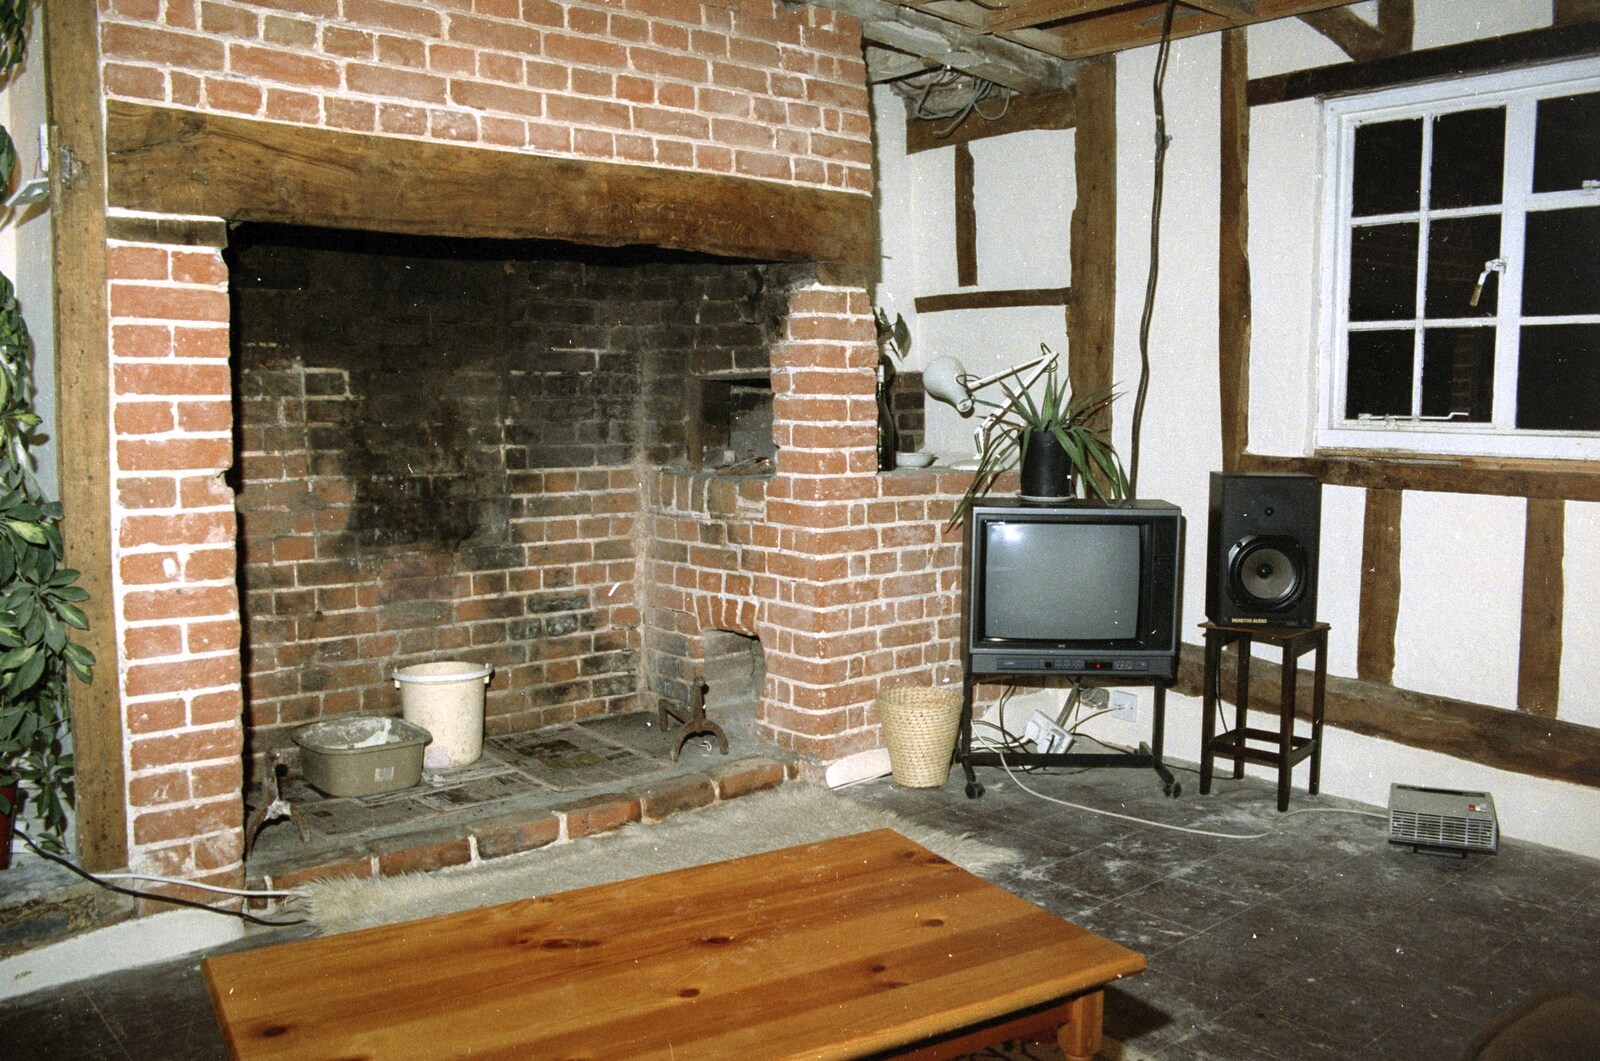 Grandmother's Seventieth Birthday, Brockenhurst and Keyhaven, Hampshire - 11th September 1994: Back home, The lounge gets a TV